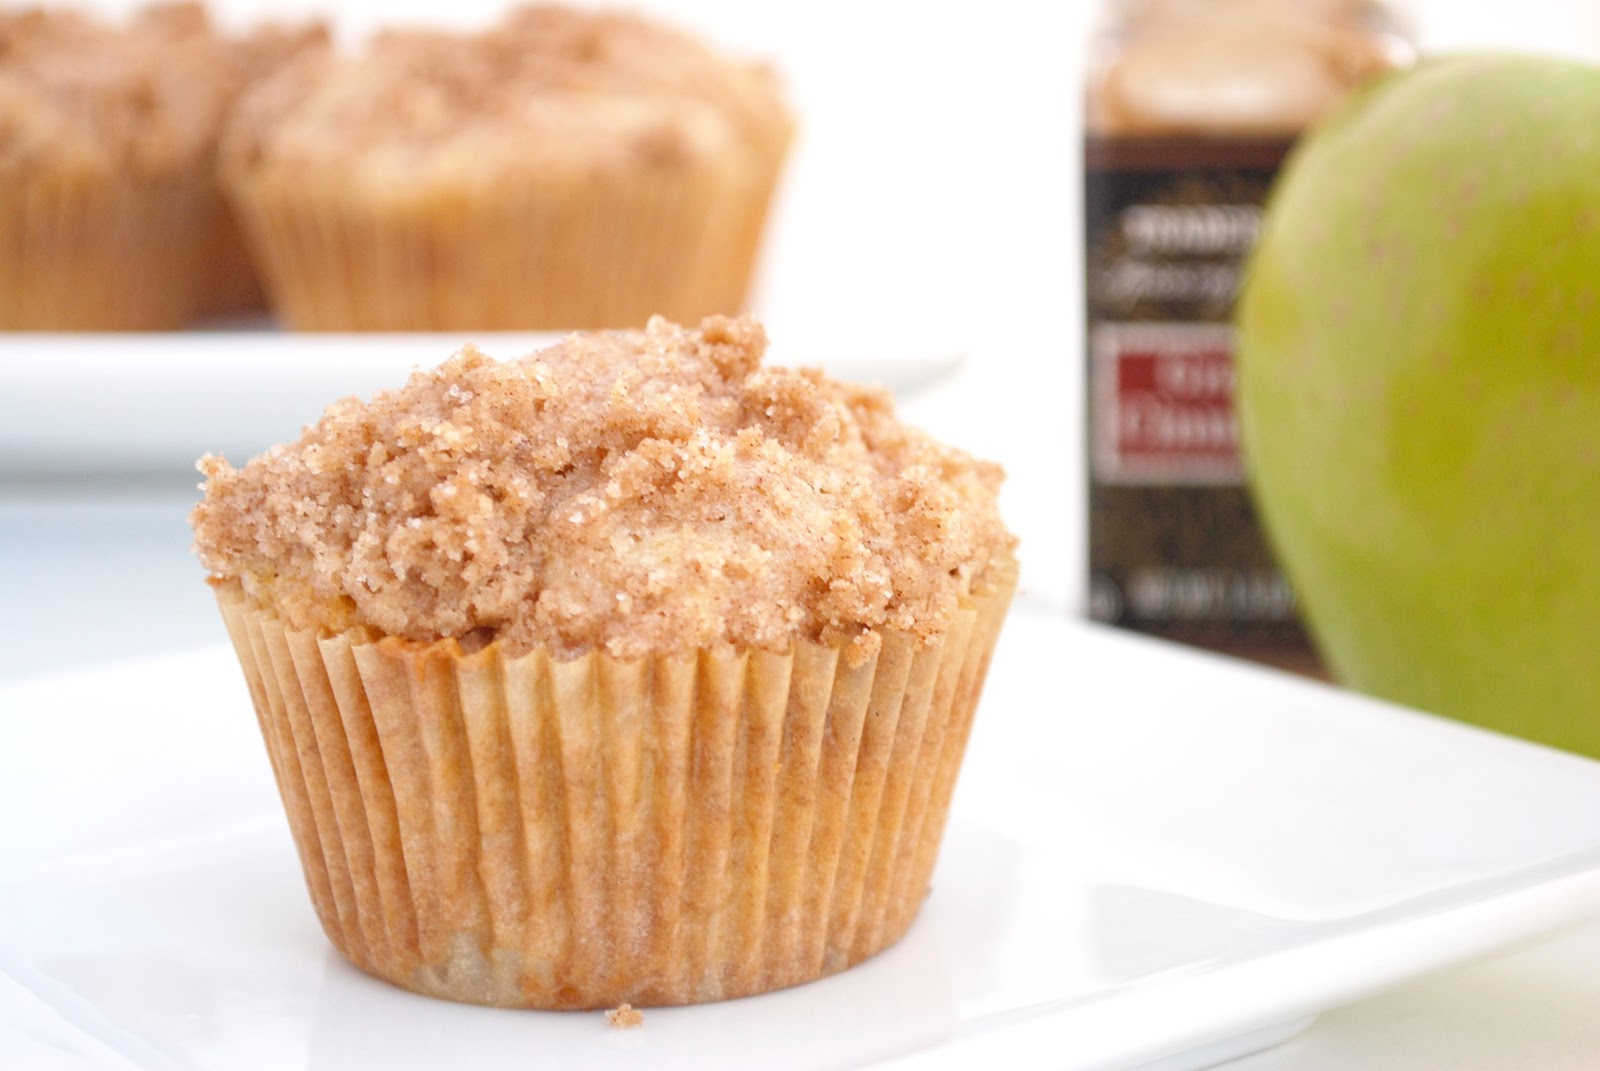 mix make how Apple blueberry to  pancakes with Muffins Cinnamon 12) (makes blueberry muffin